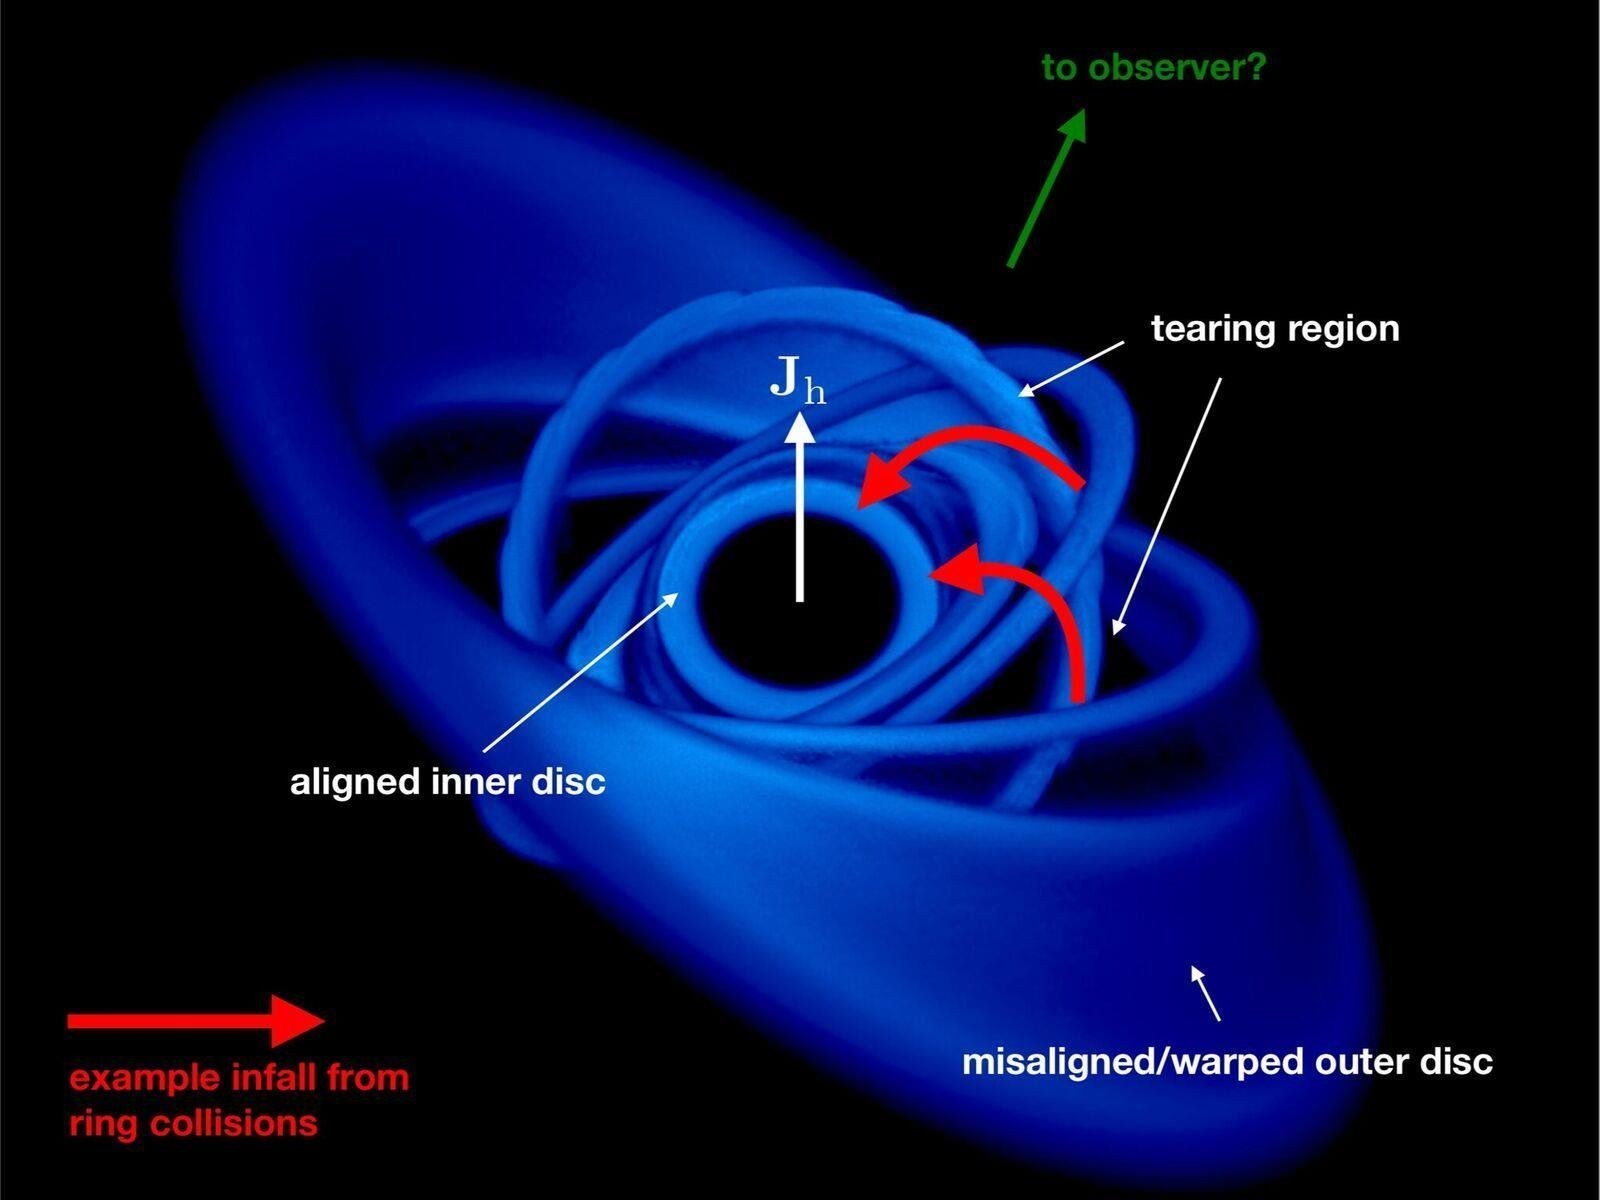 Matter falls into a black hole at 30 percent the speed of light - Orbit, Space, Black hole, Supermassive black hole